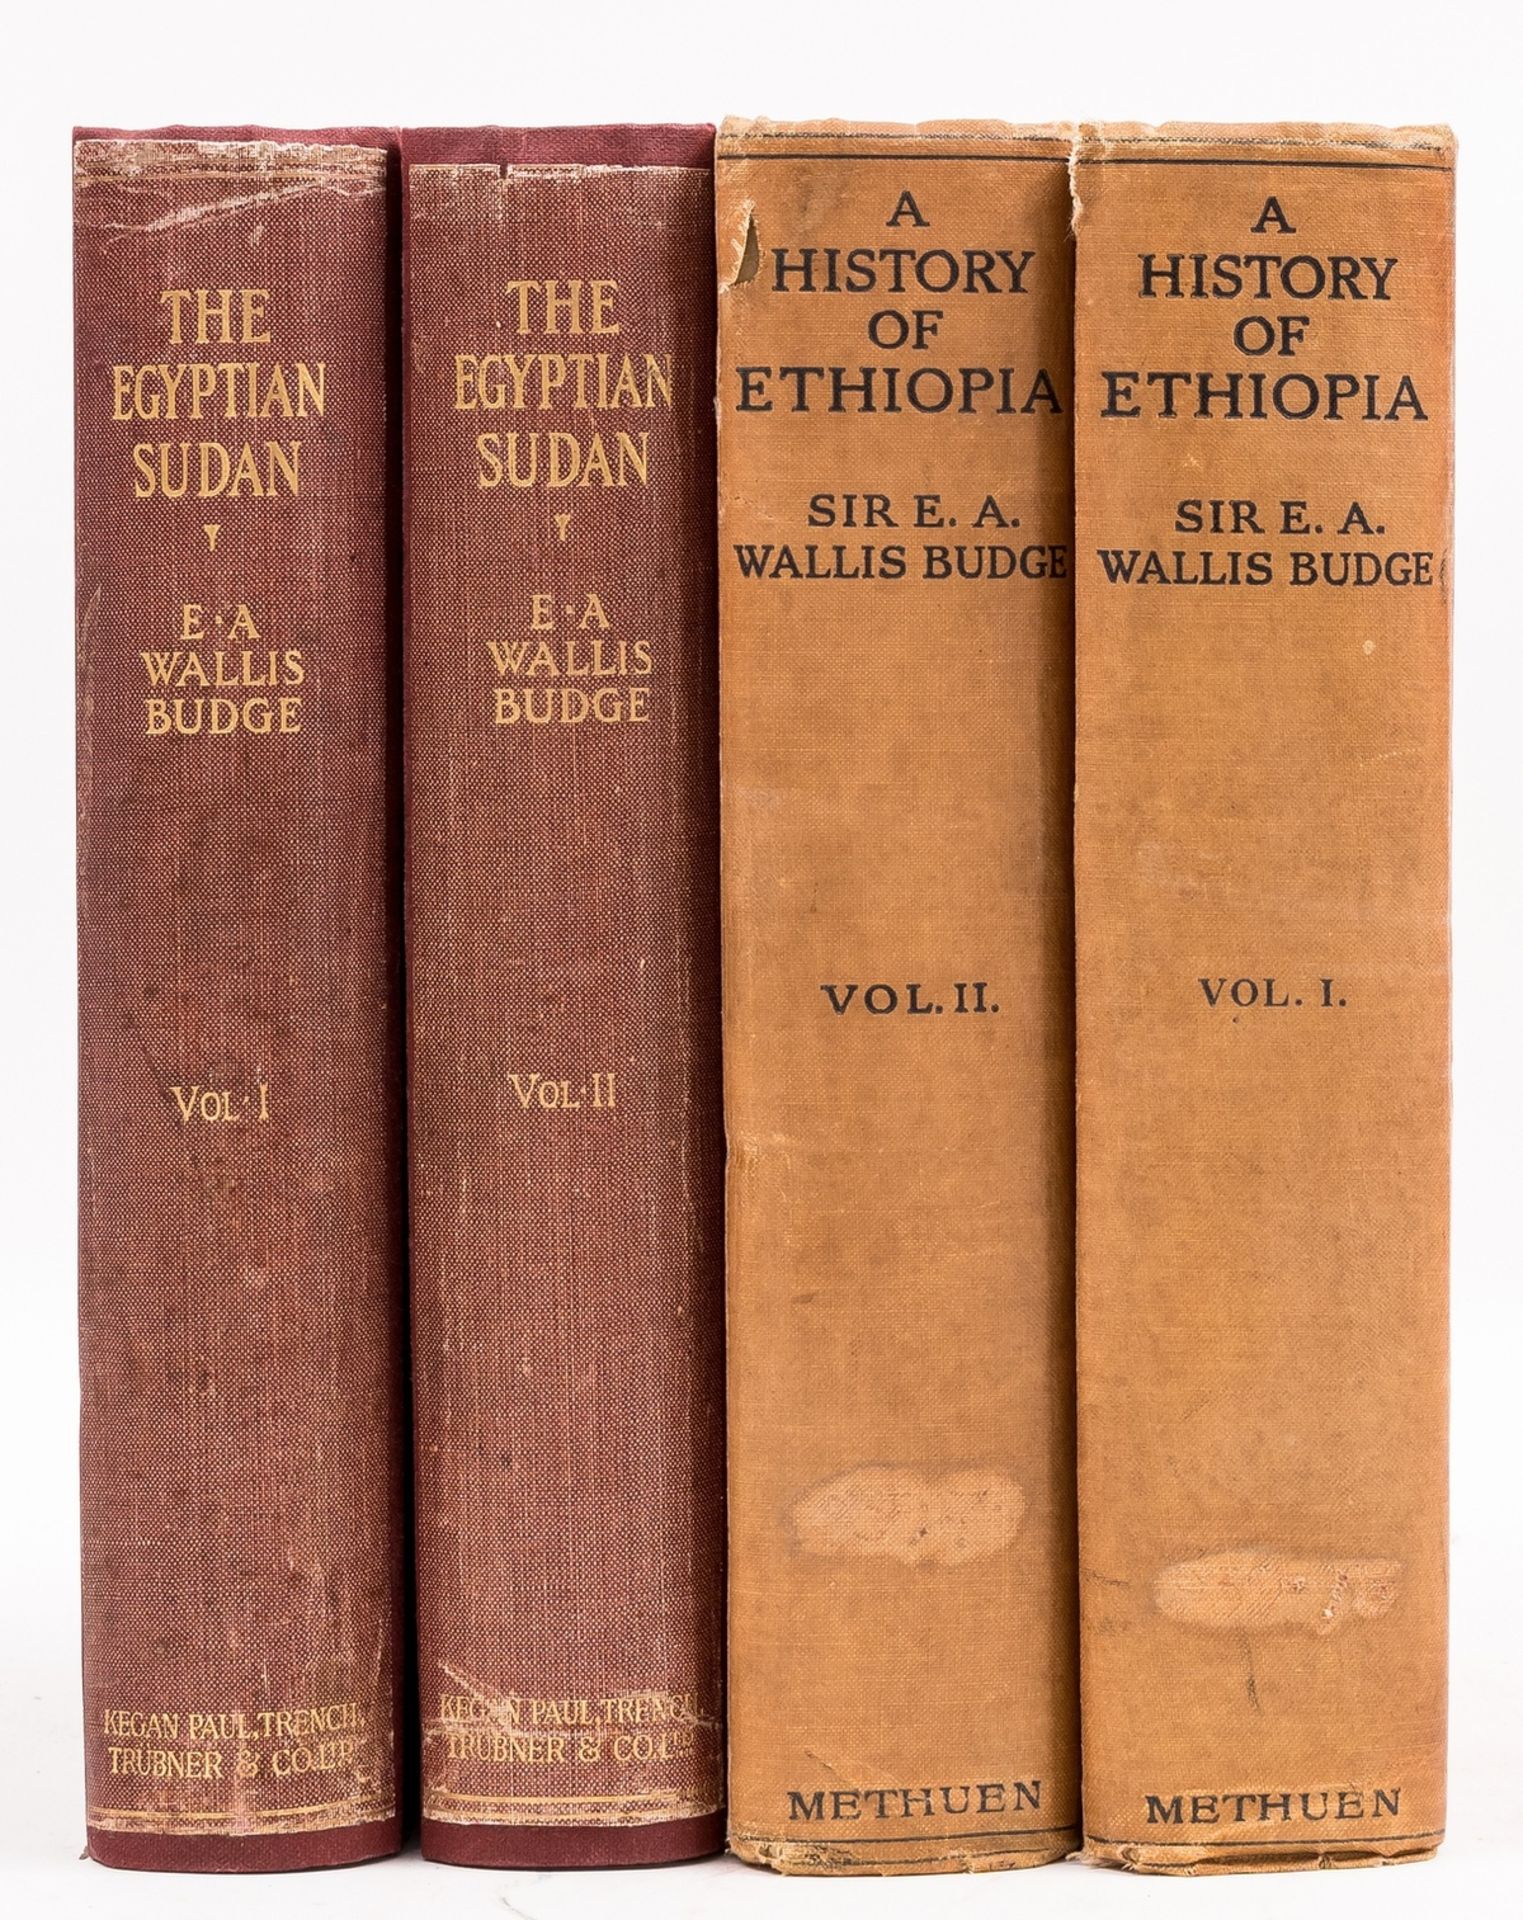 Africa.- Budge (E. A. Wallis) The Egyptian Sudan: Its History and Monuments, 2 vol., first …